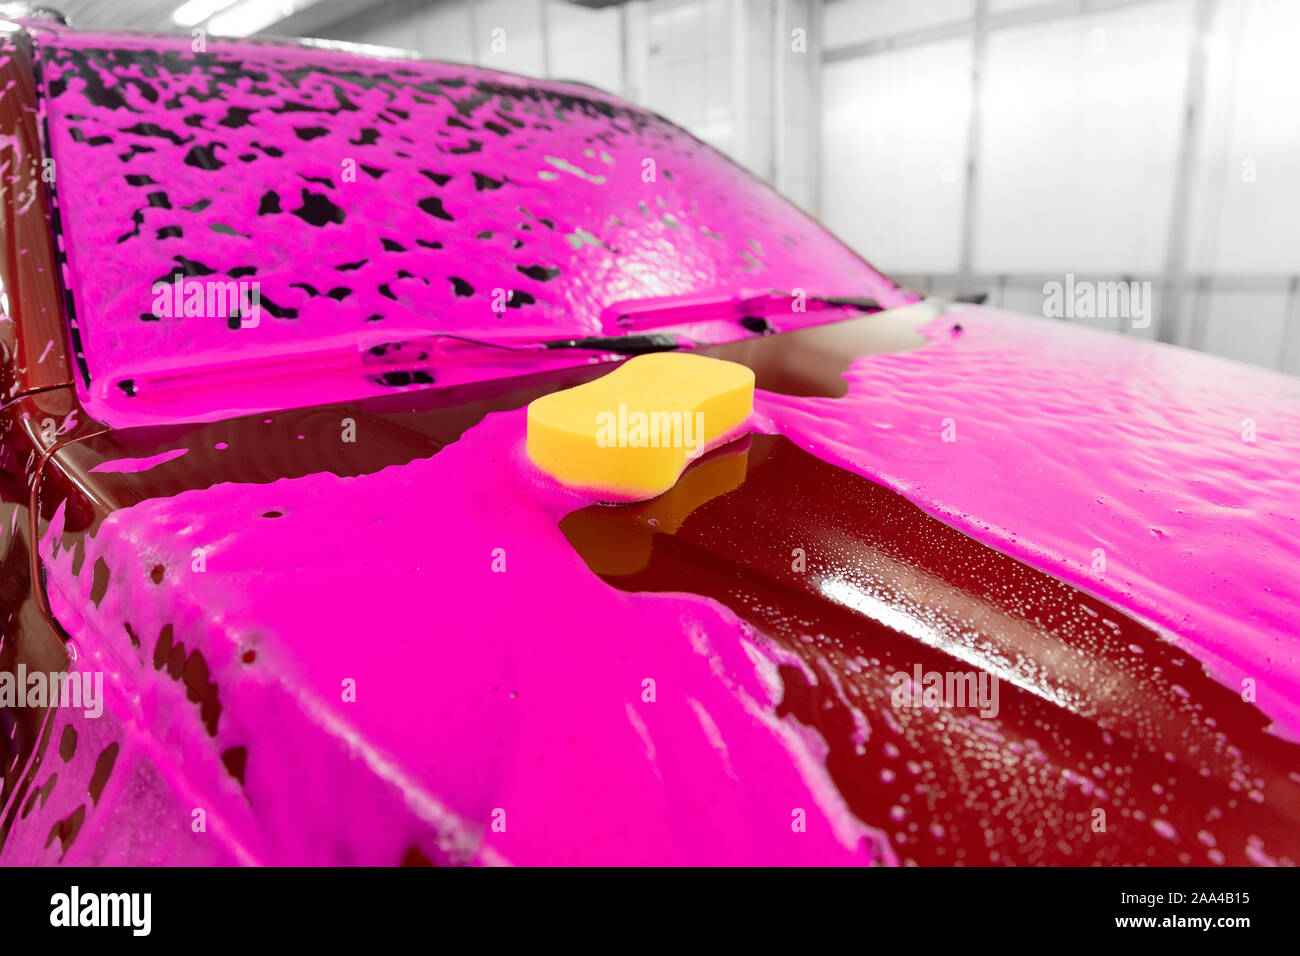 Car washing concept. Red car in foam Stock Photo - Alamy